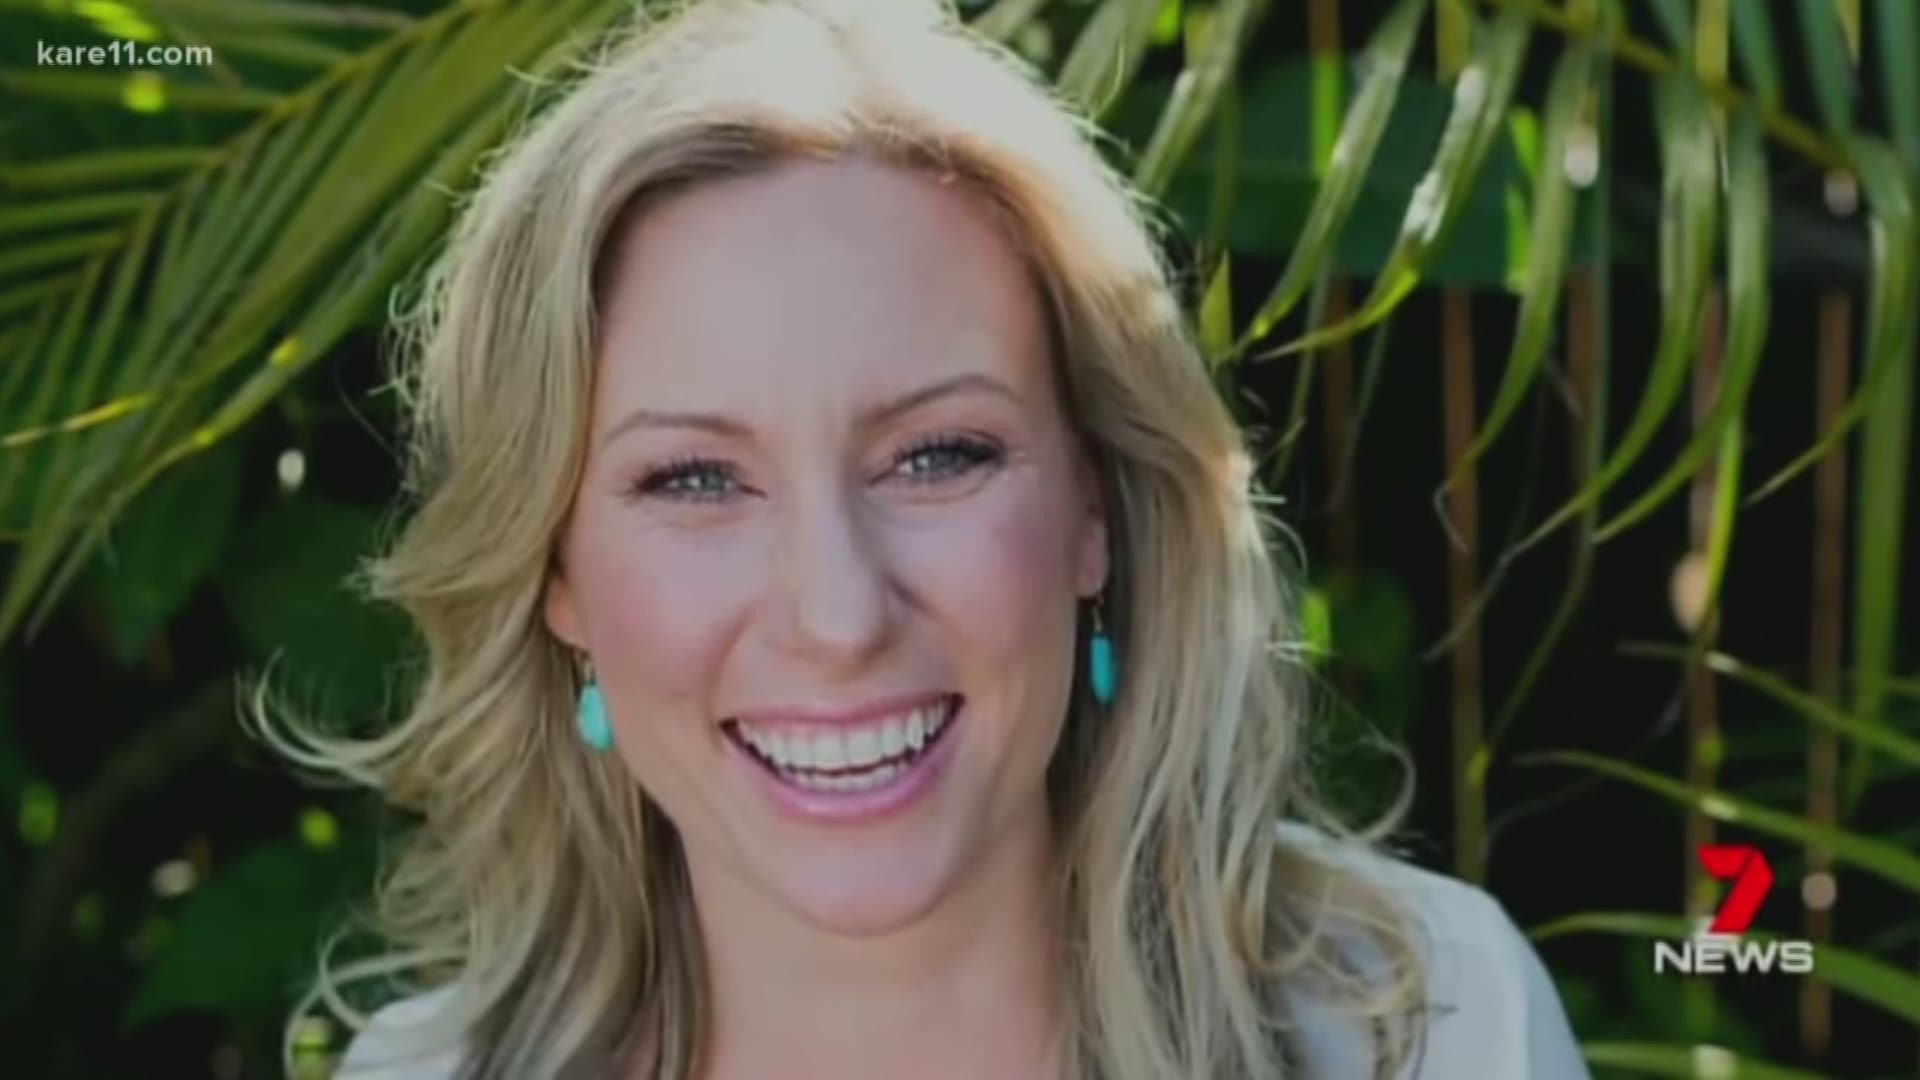 The city of Minneapolis has agreed to a $20 million settlement with the family of Justine Ruszczyk Damond